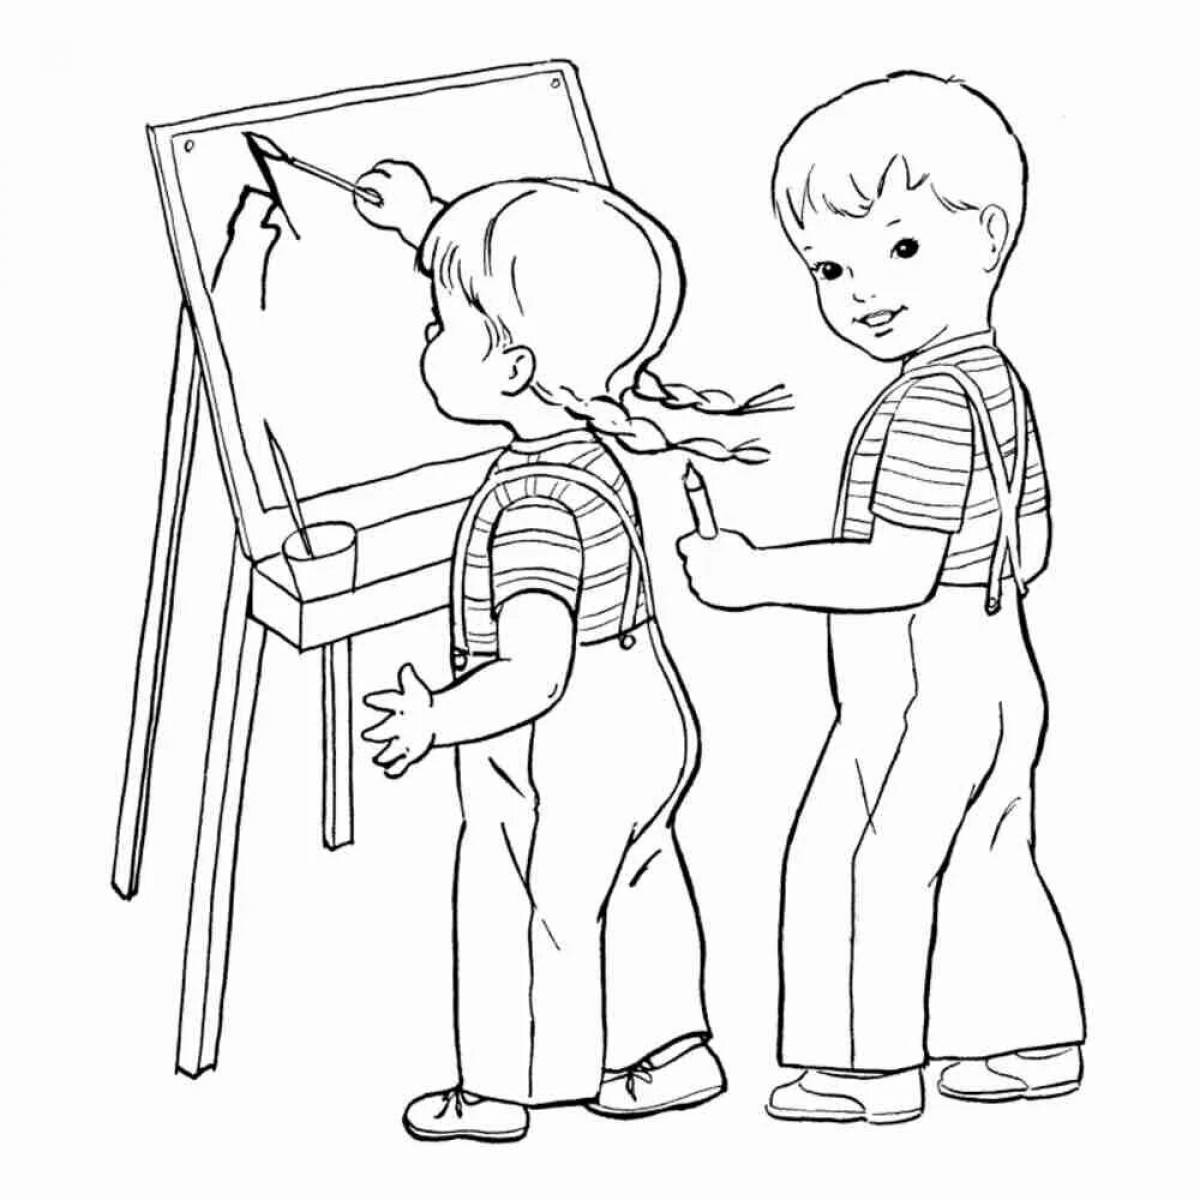 Drawing for kids #24